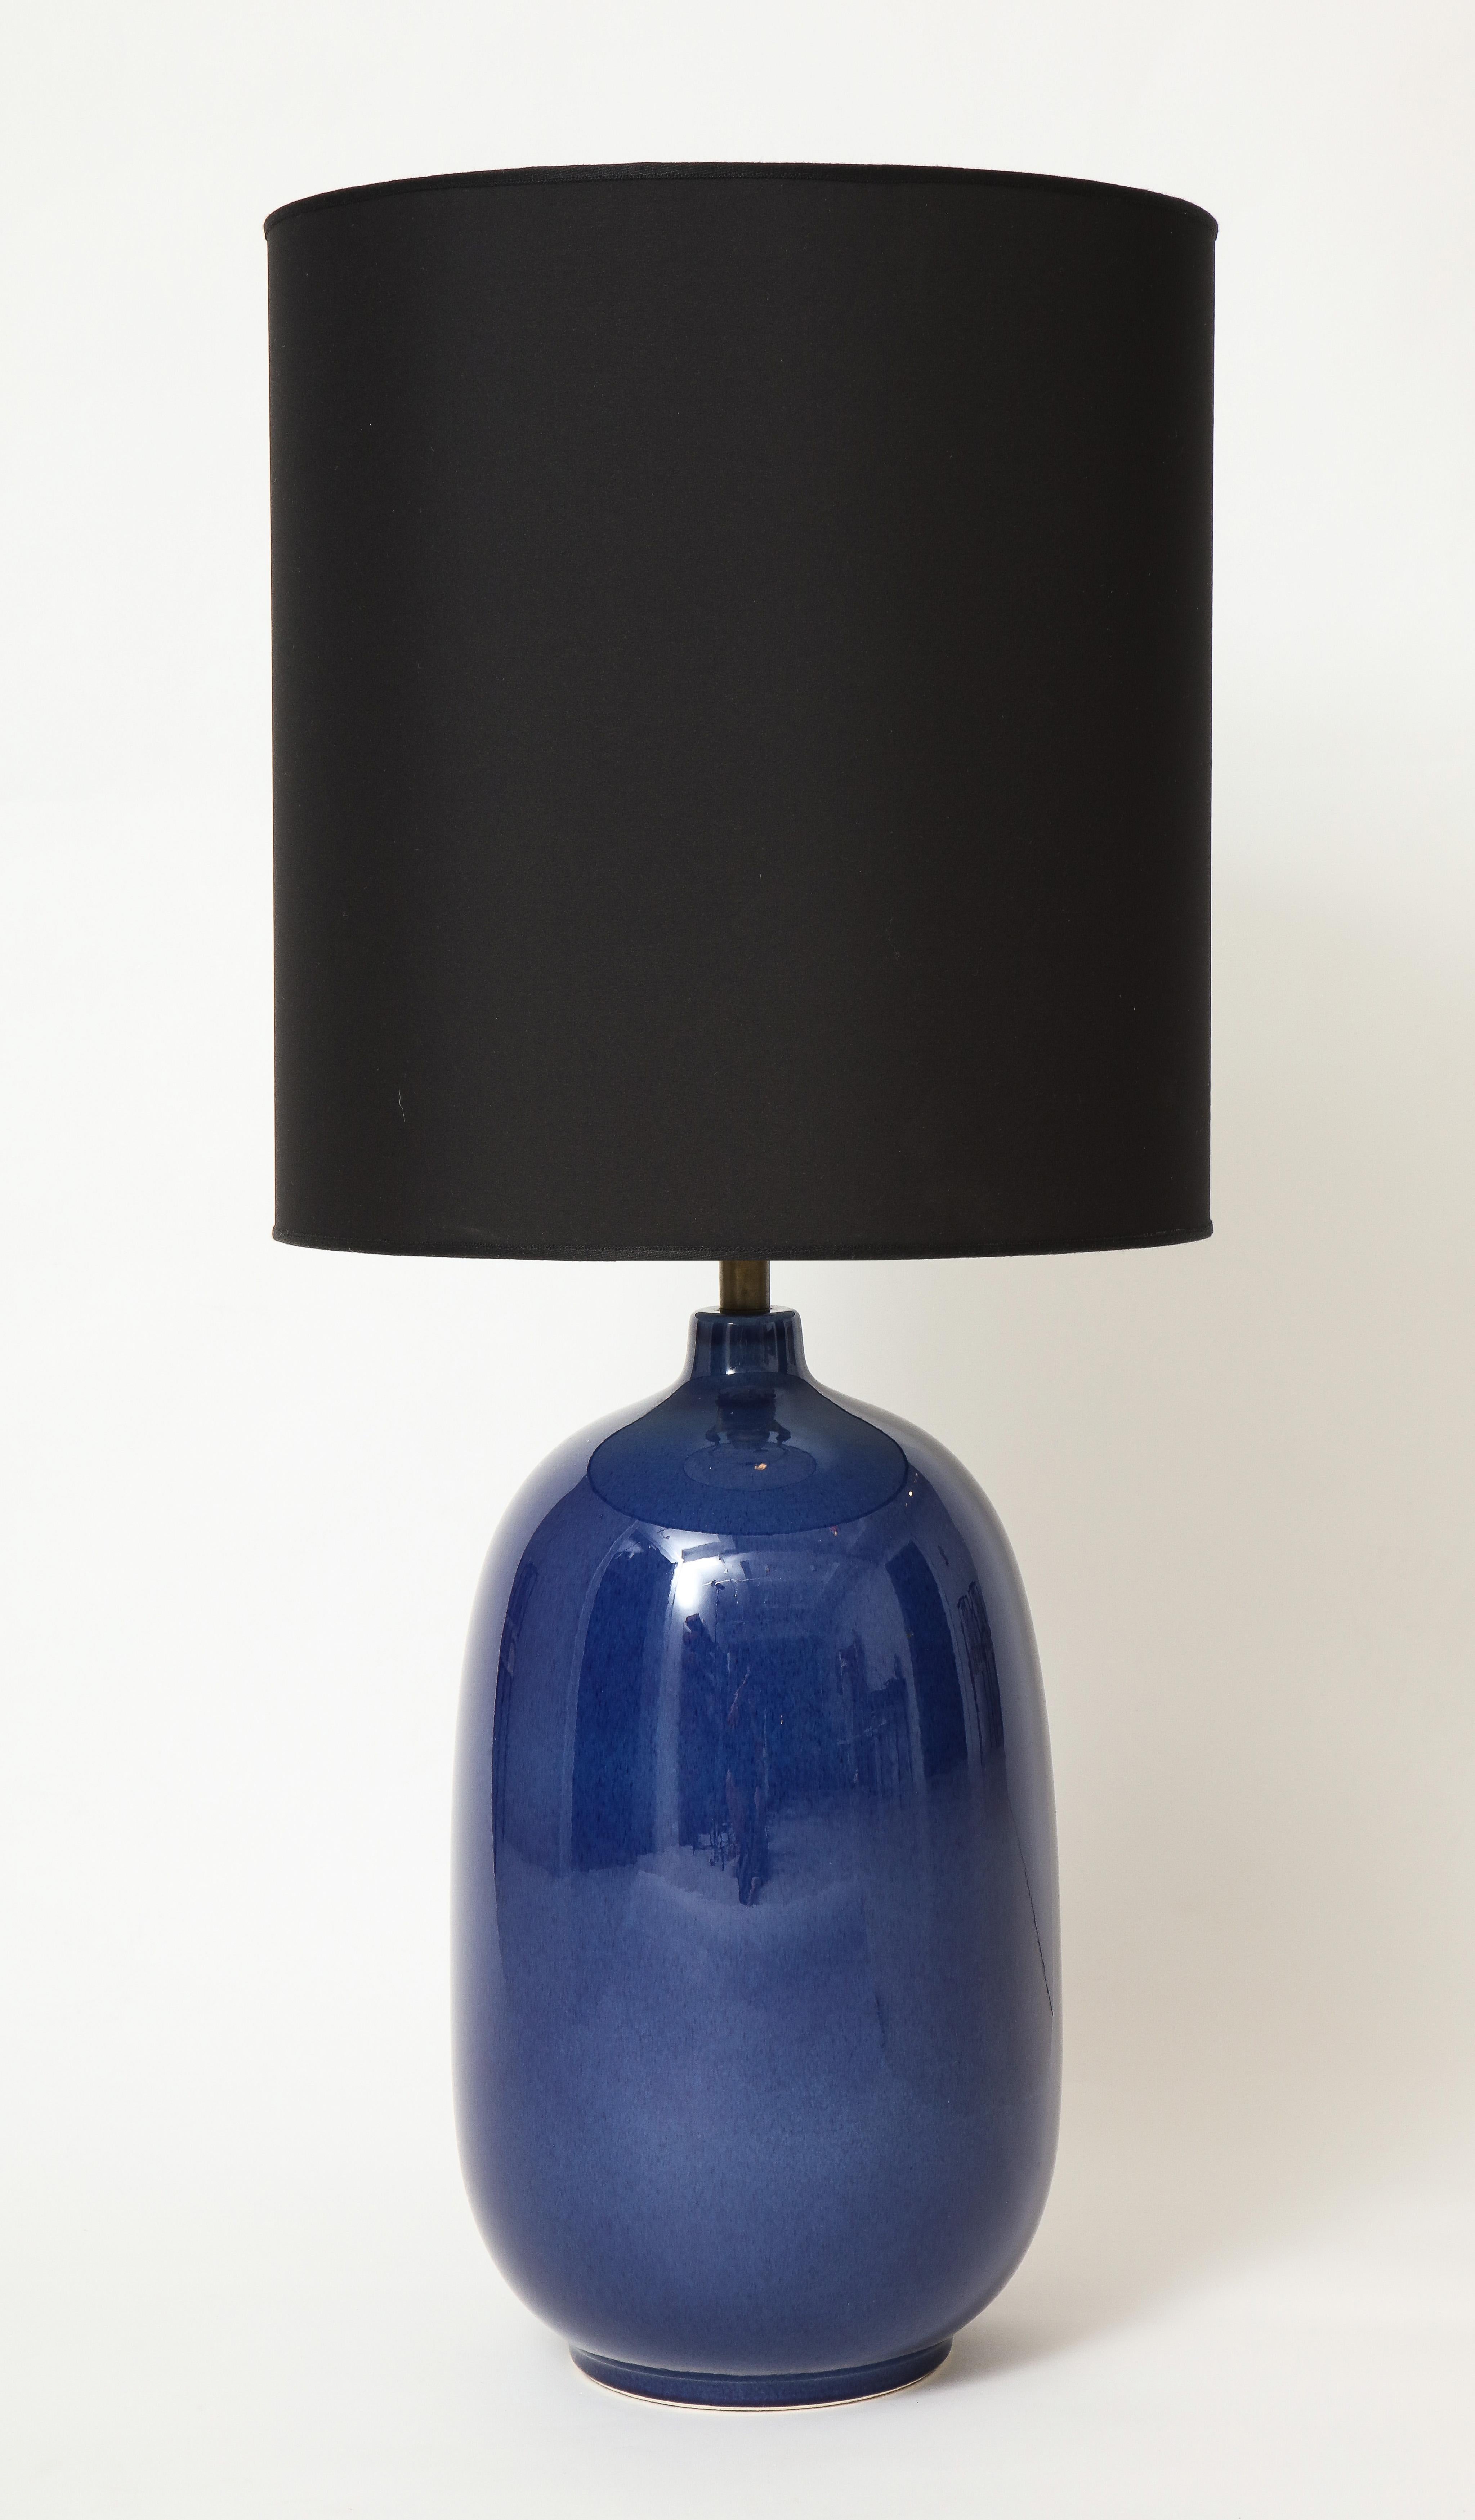 Lapis blue ceramic Lotte & Gunnar Bostlund lamp; beautiful ovoid shape and rich blue color.
Size:  18 1/4